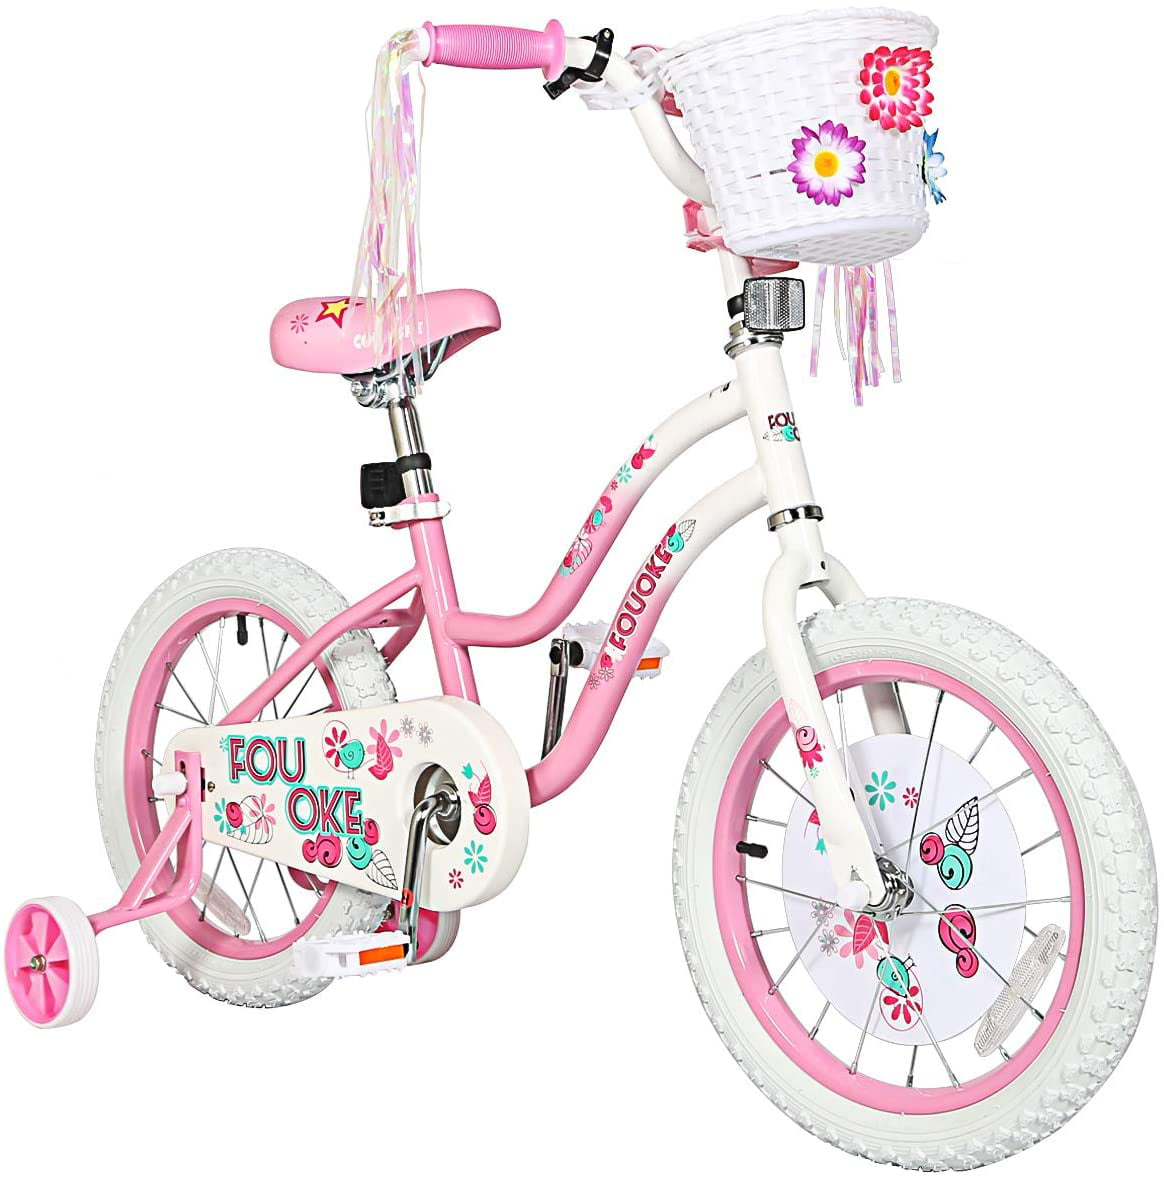 Princess Kids Bike 16 Inch Boys Girls Bike with Training Wheels Kids Bicycle for Toddlers and Children